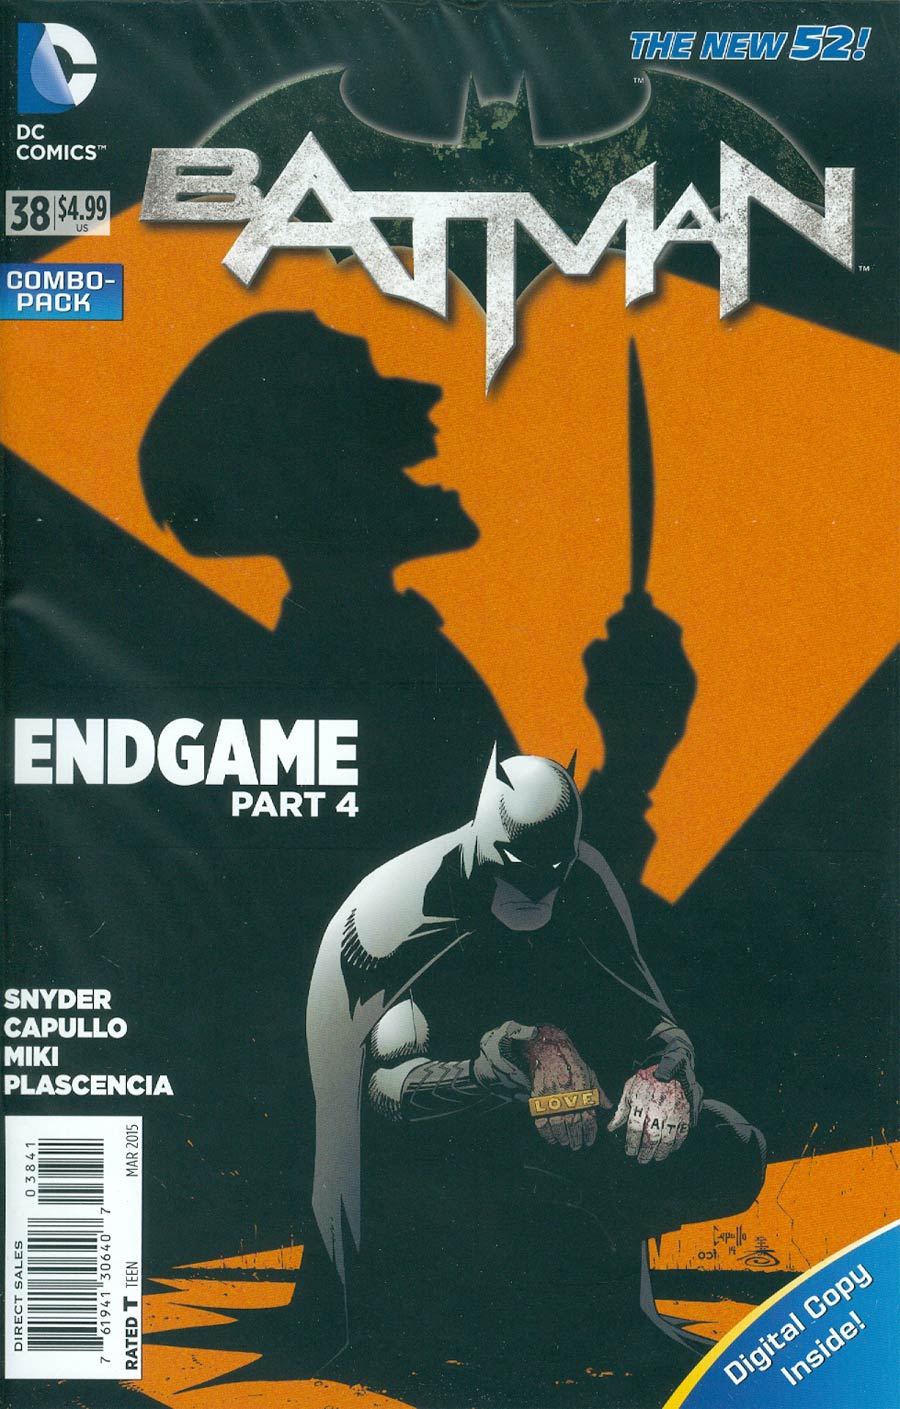 Batman Vol 2 #38 Cover D Combo Pack Without Polybag